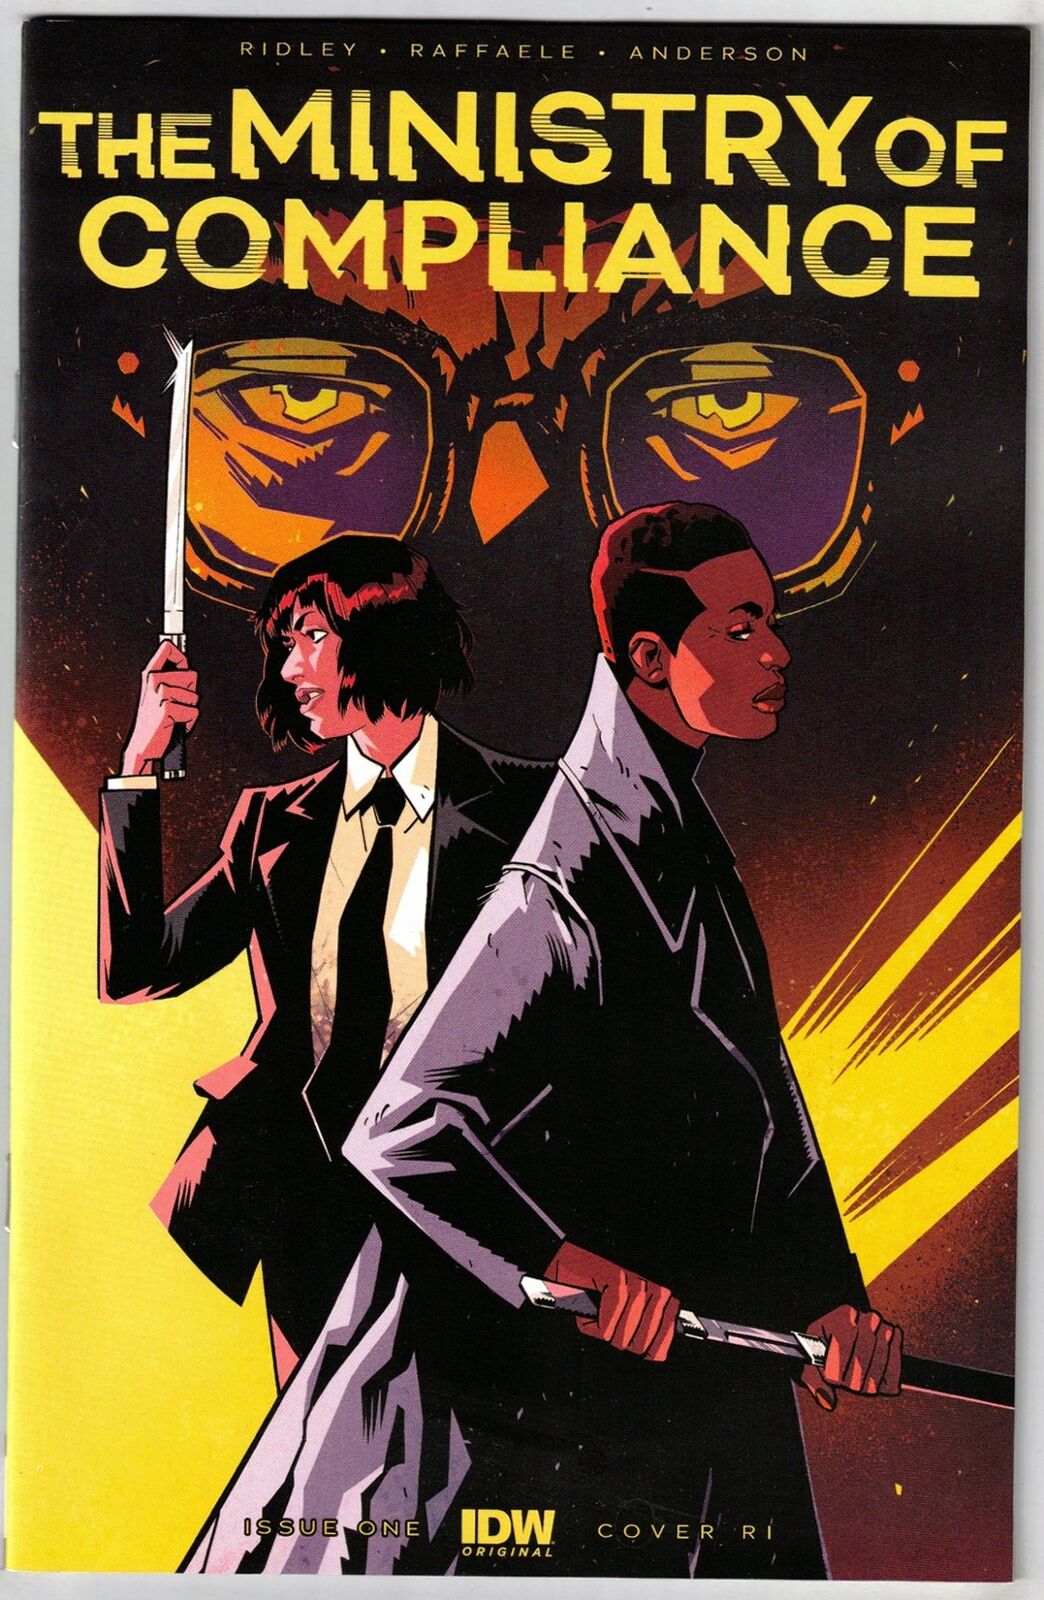 MINISTRY OF COMPLIANCE #1- 1:25 CLAIRE ROE VARIANT- JOHN RIDLEY- IDW